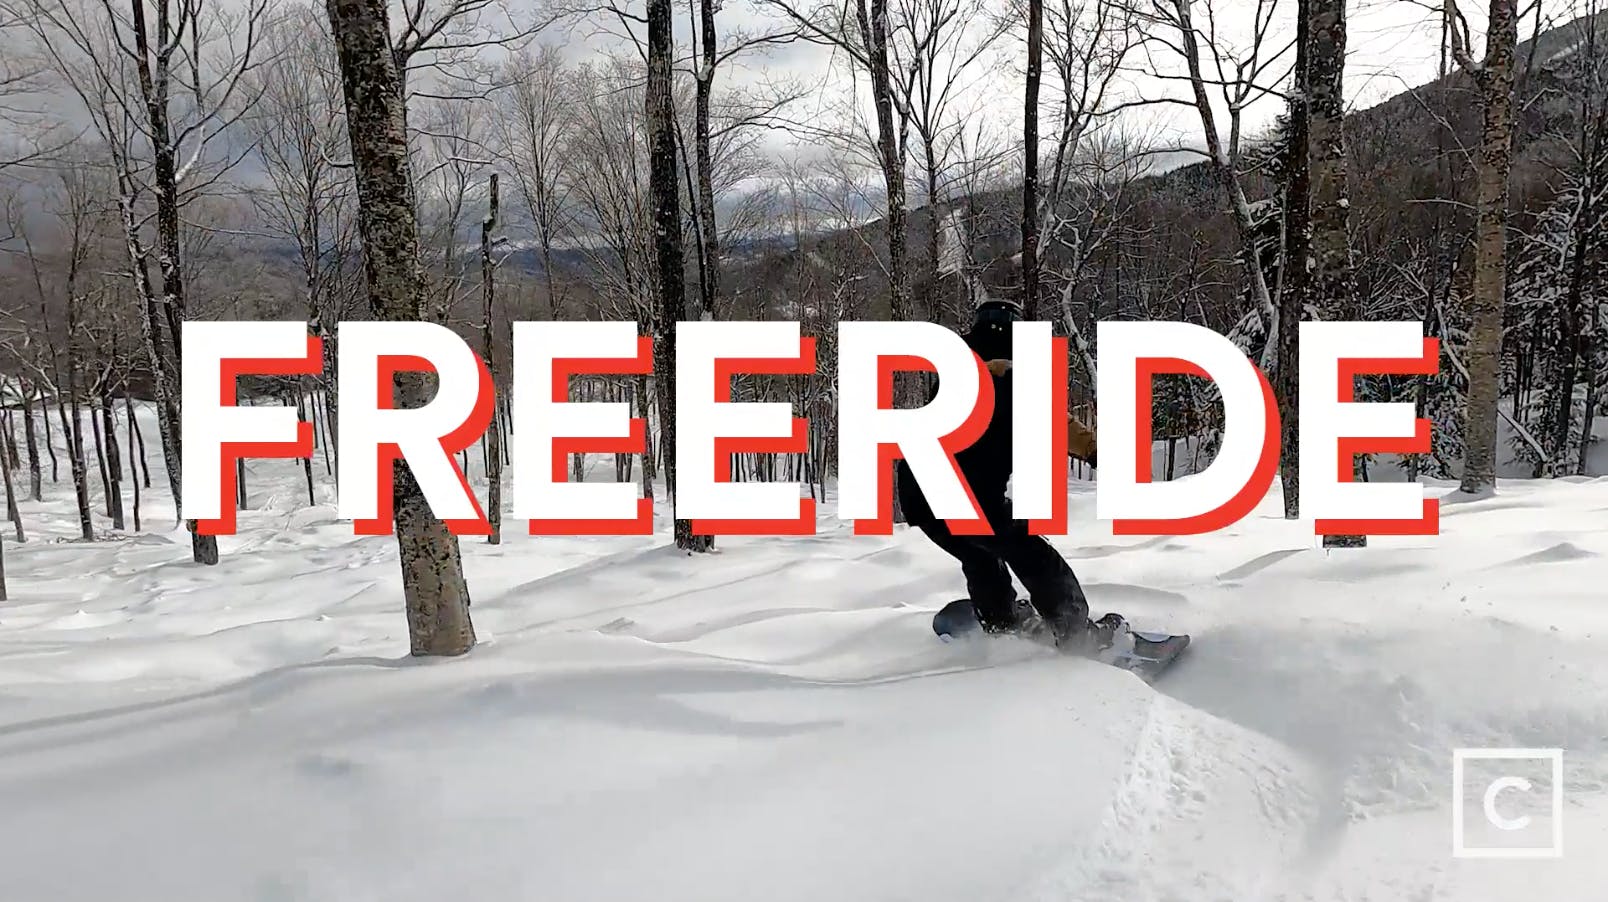 Curated expert Colby Henderson plowing through powder snow on the Lib Tech Orca with a "Freeride" graphic over the image